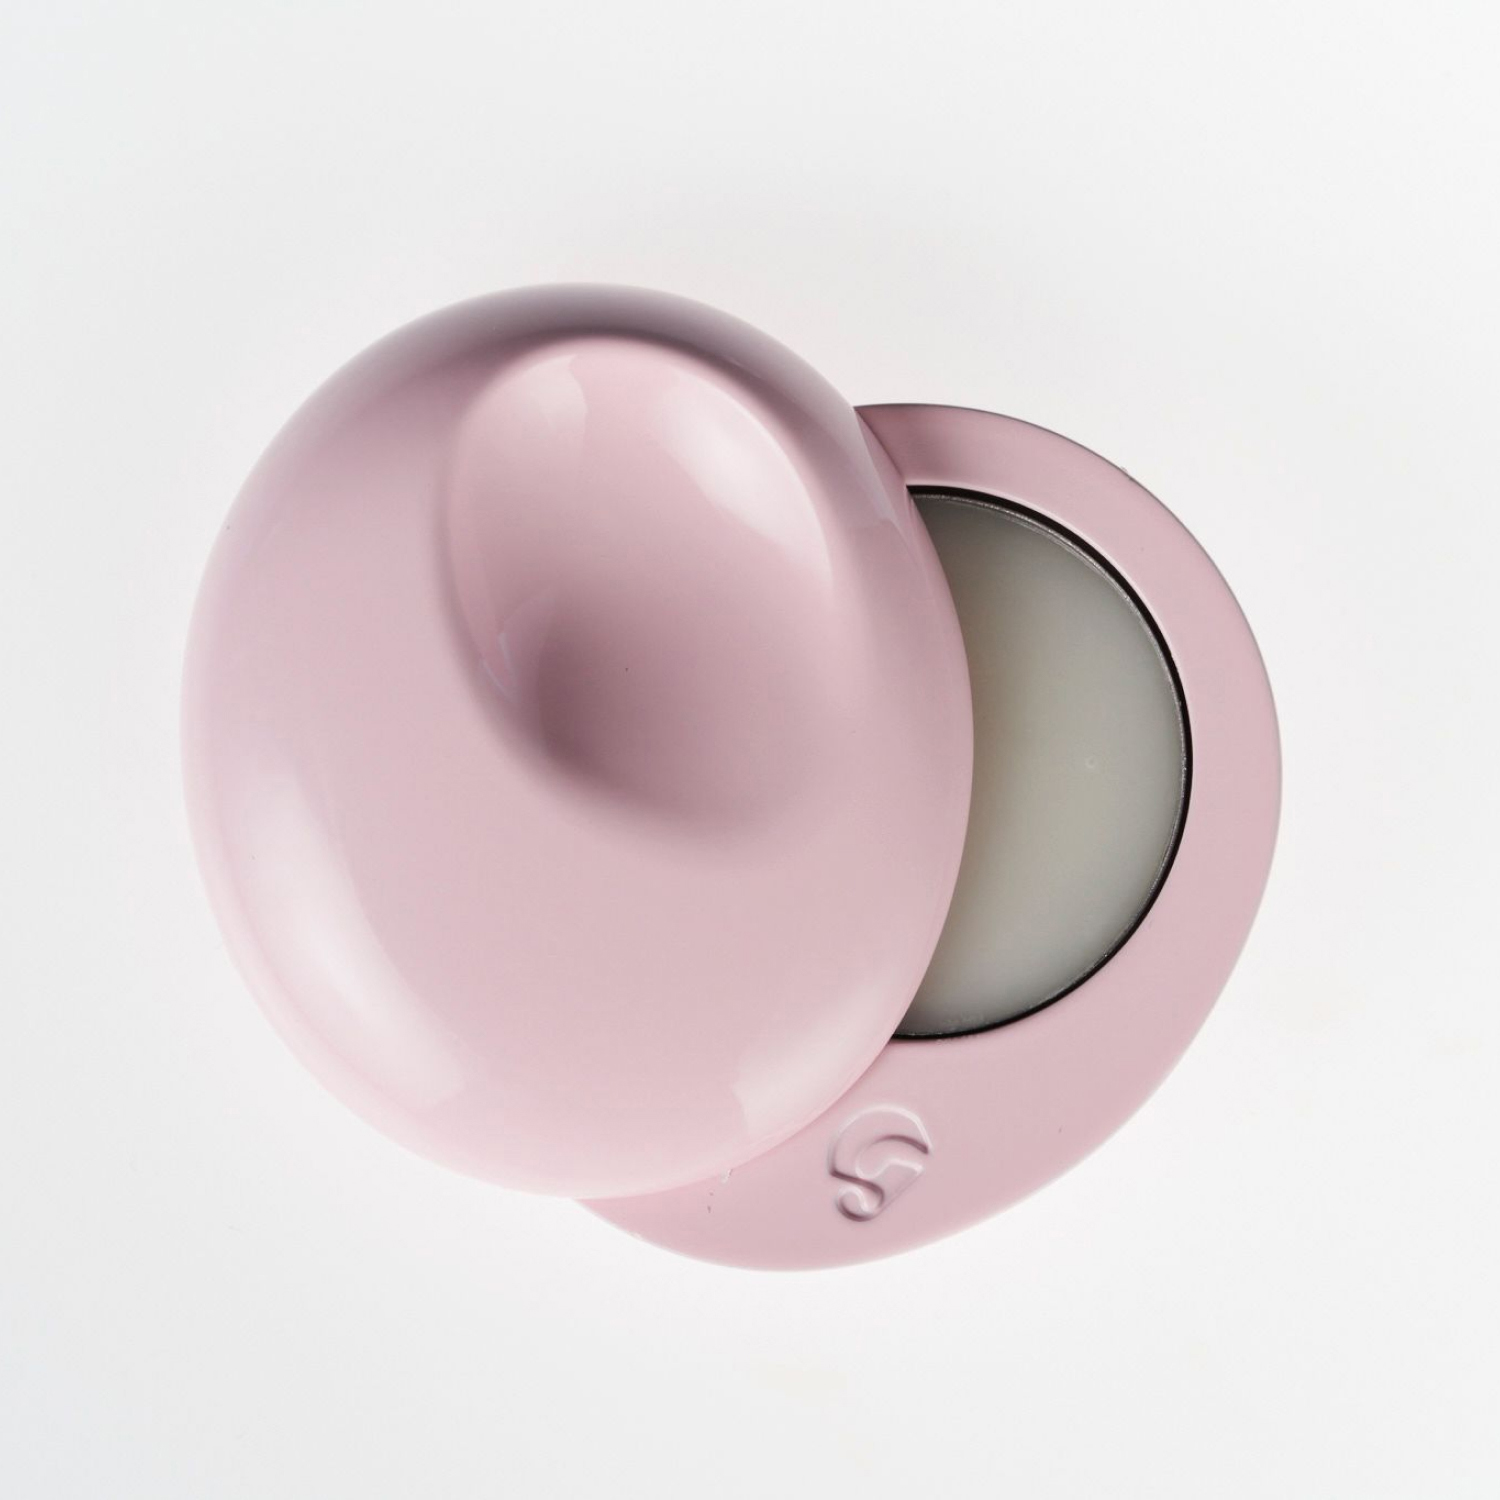 GLOSSIER YOU SOLID PERFUME